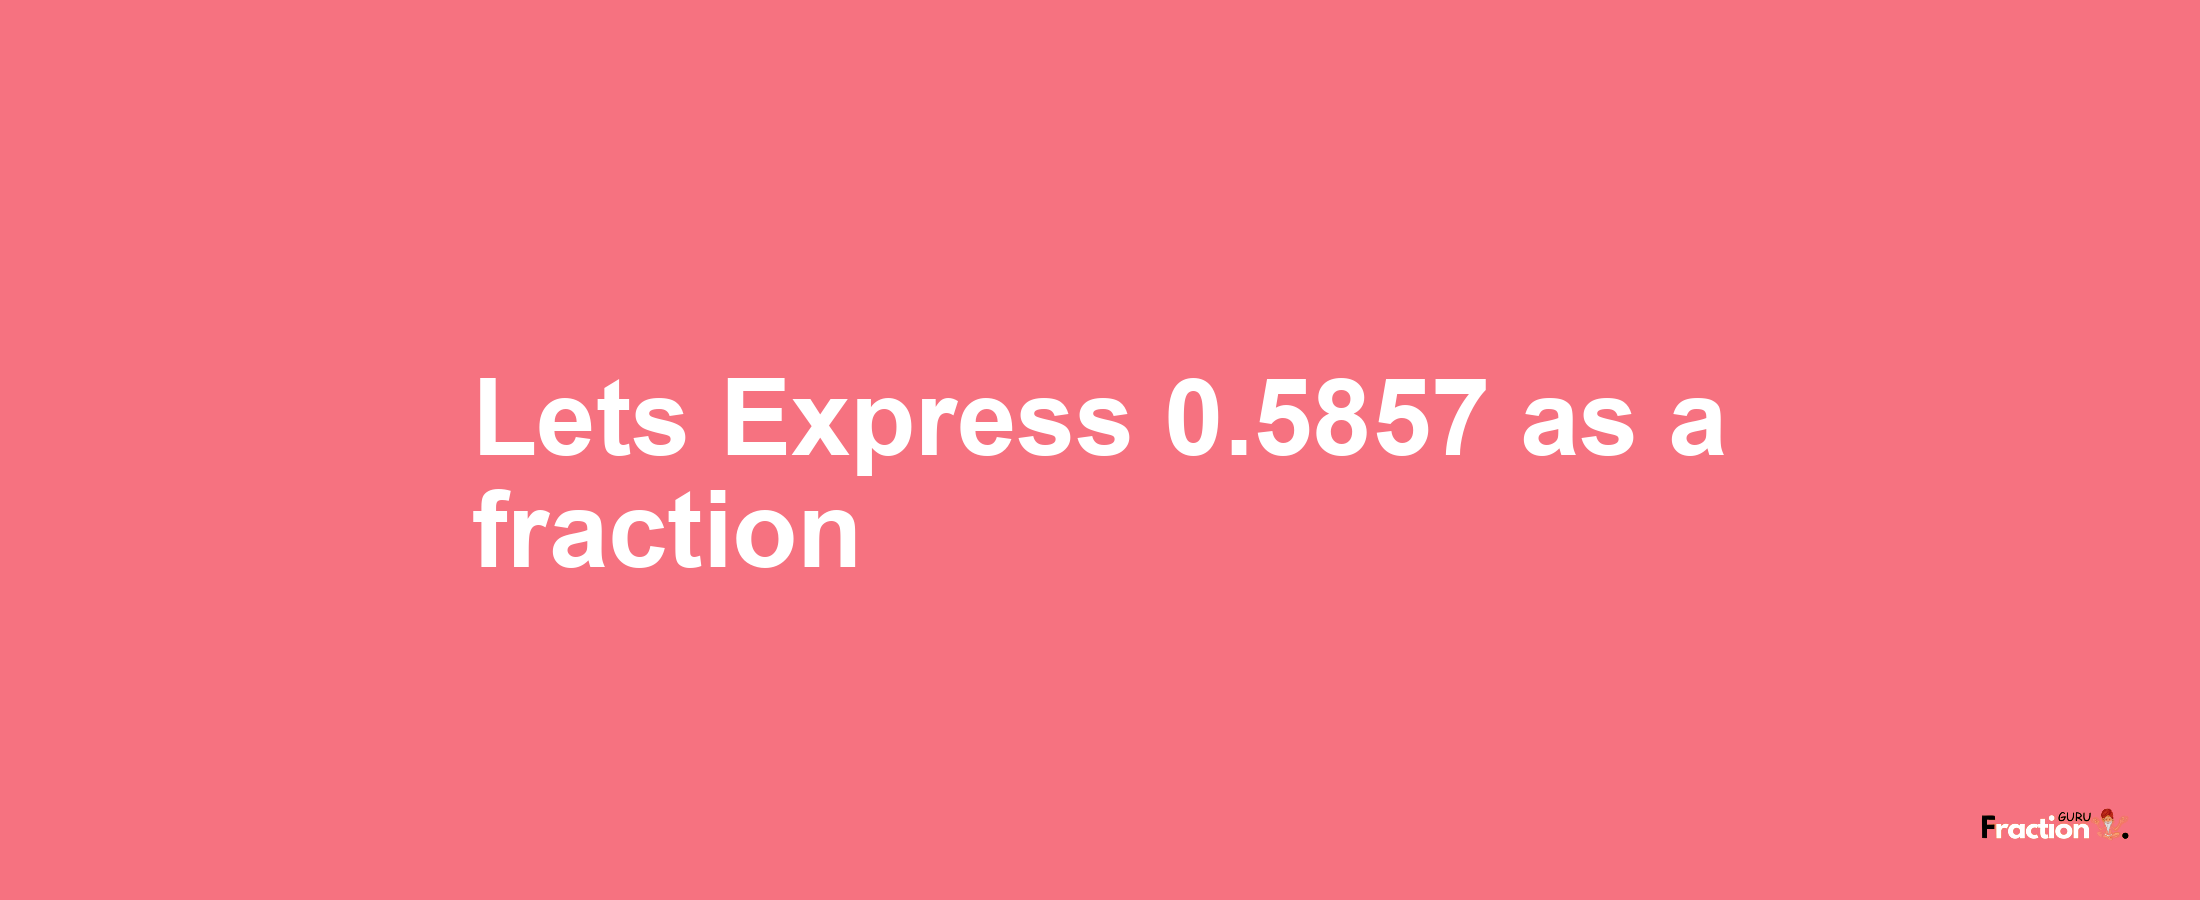 Lets Express 0.5857 as afraction